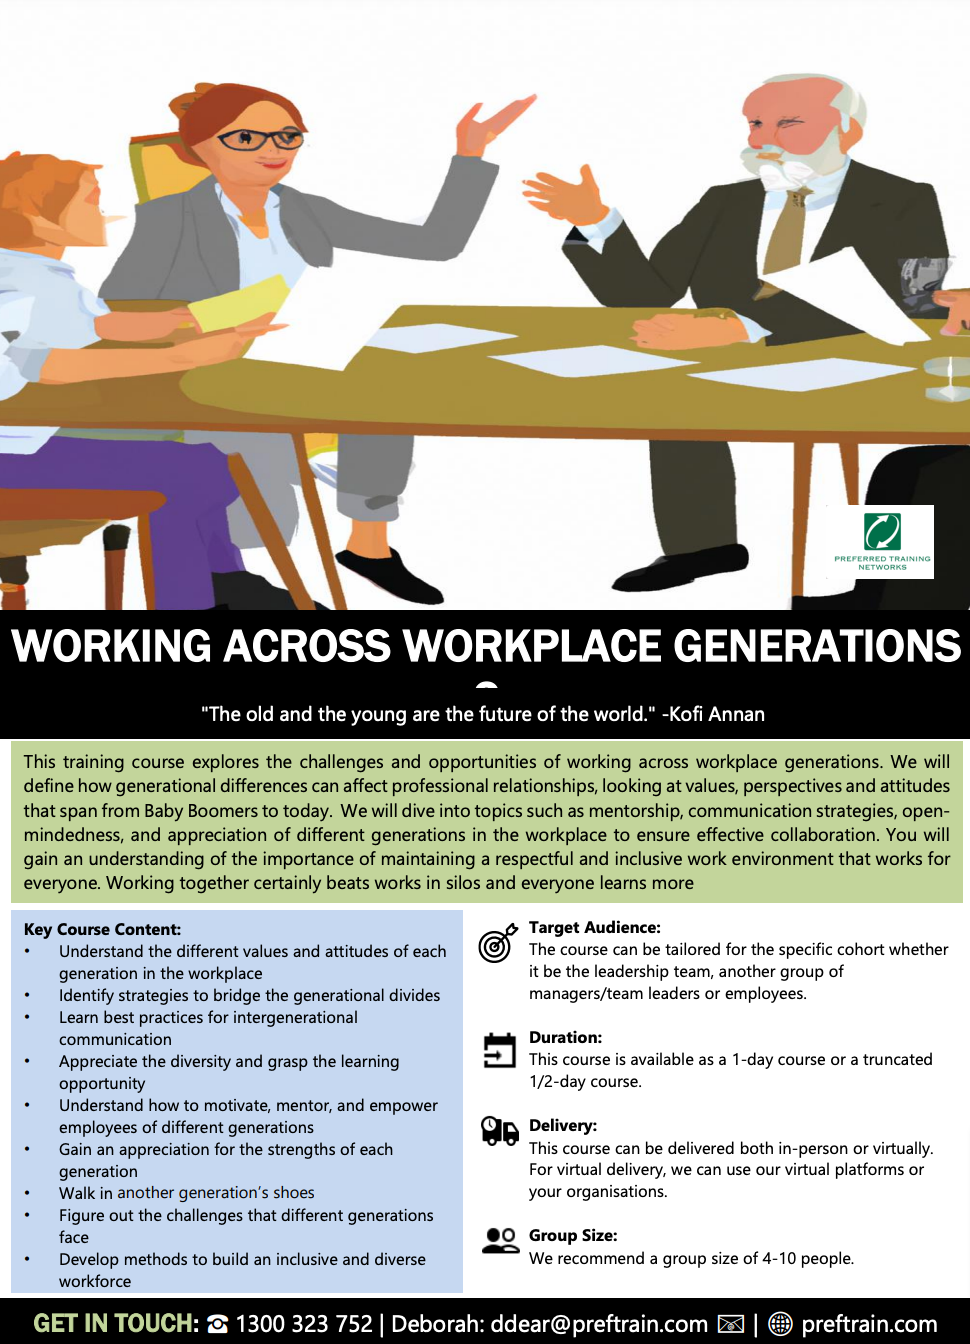 WORKING ACROSS WORKPLACE GENERATIONS